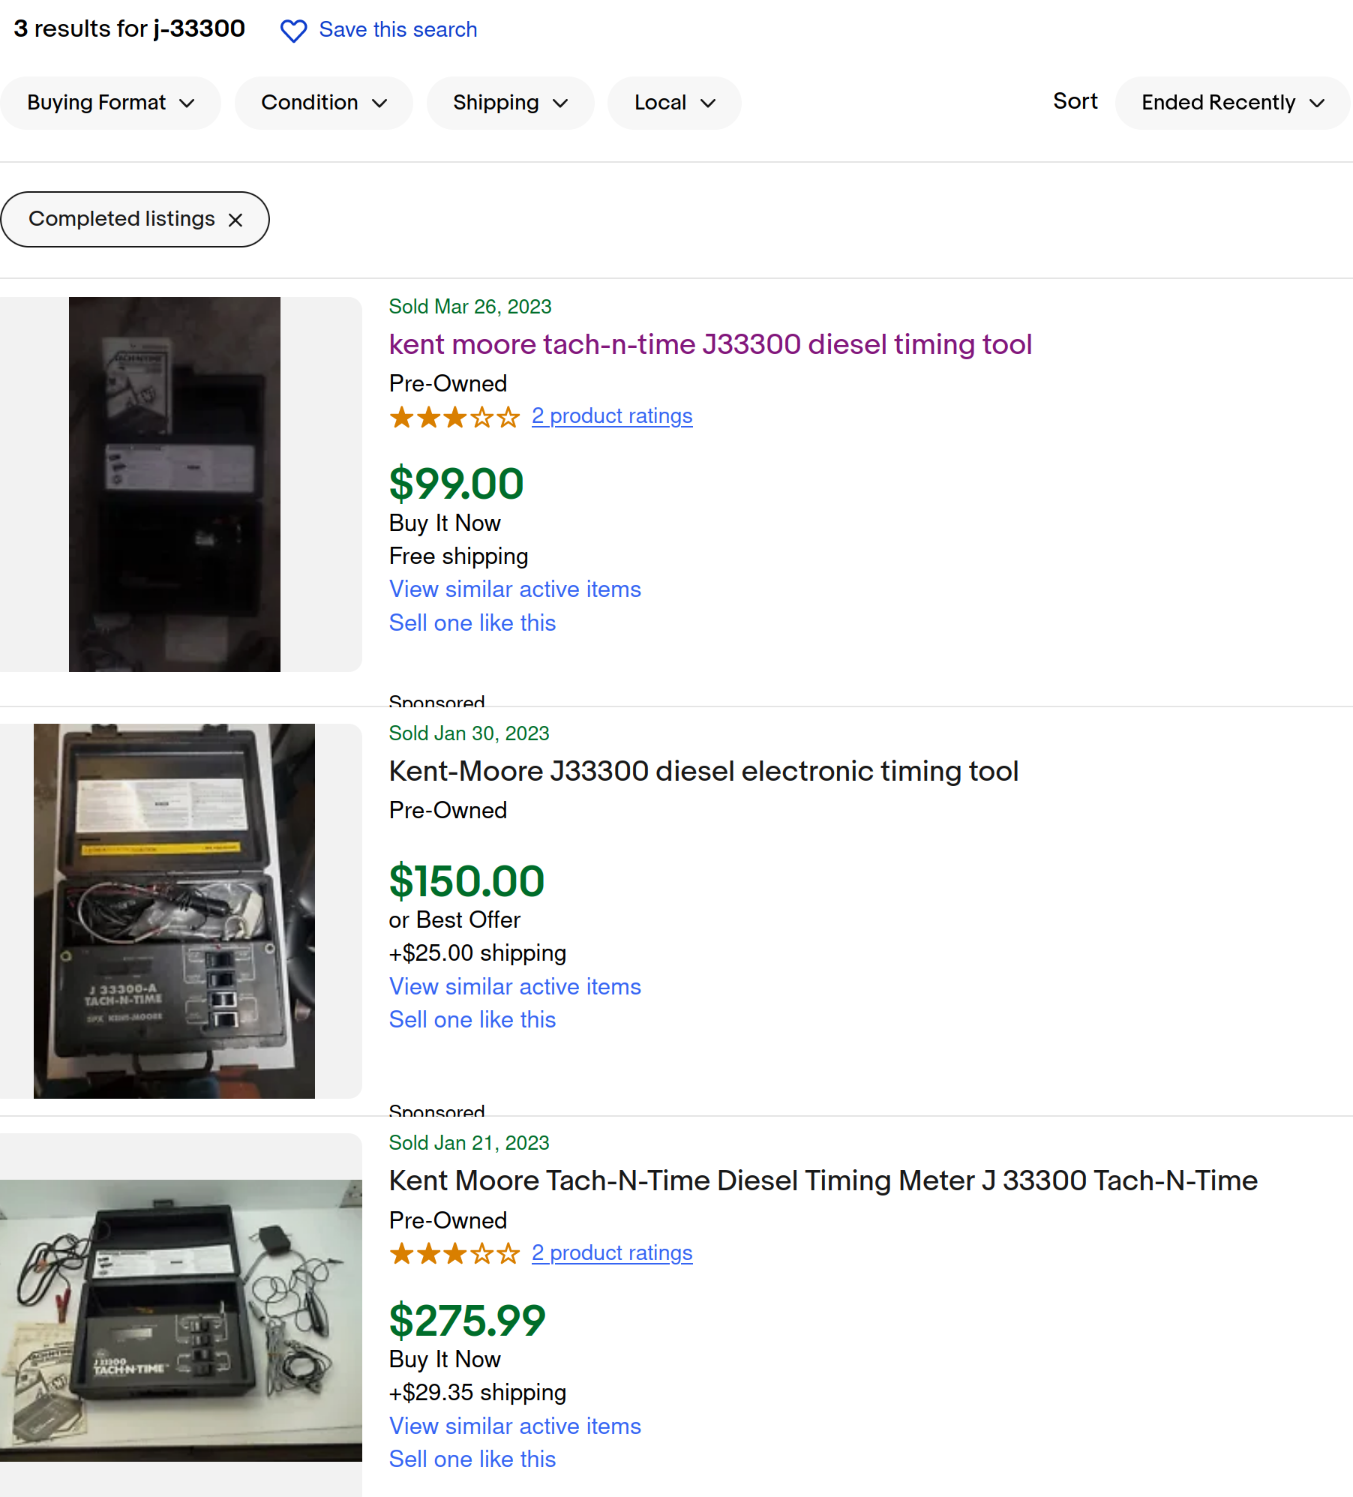 eBay results of recent sales of J-33300